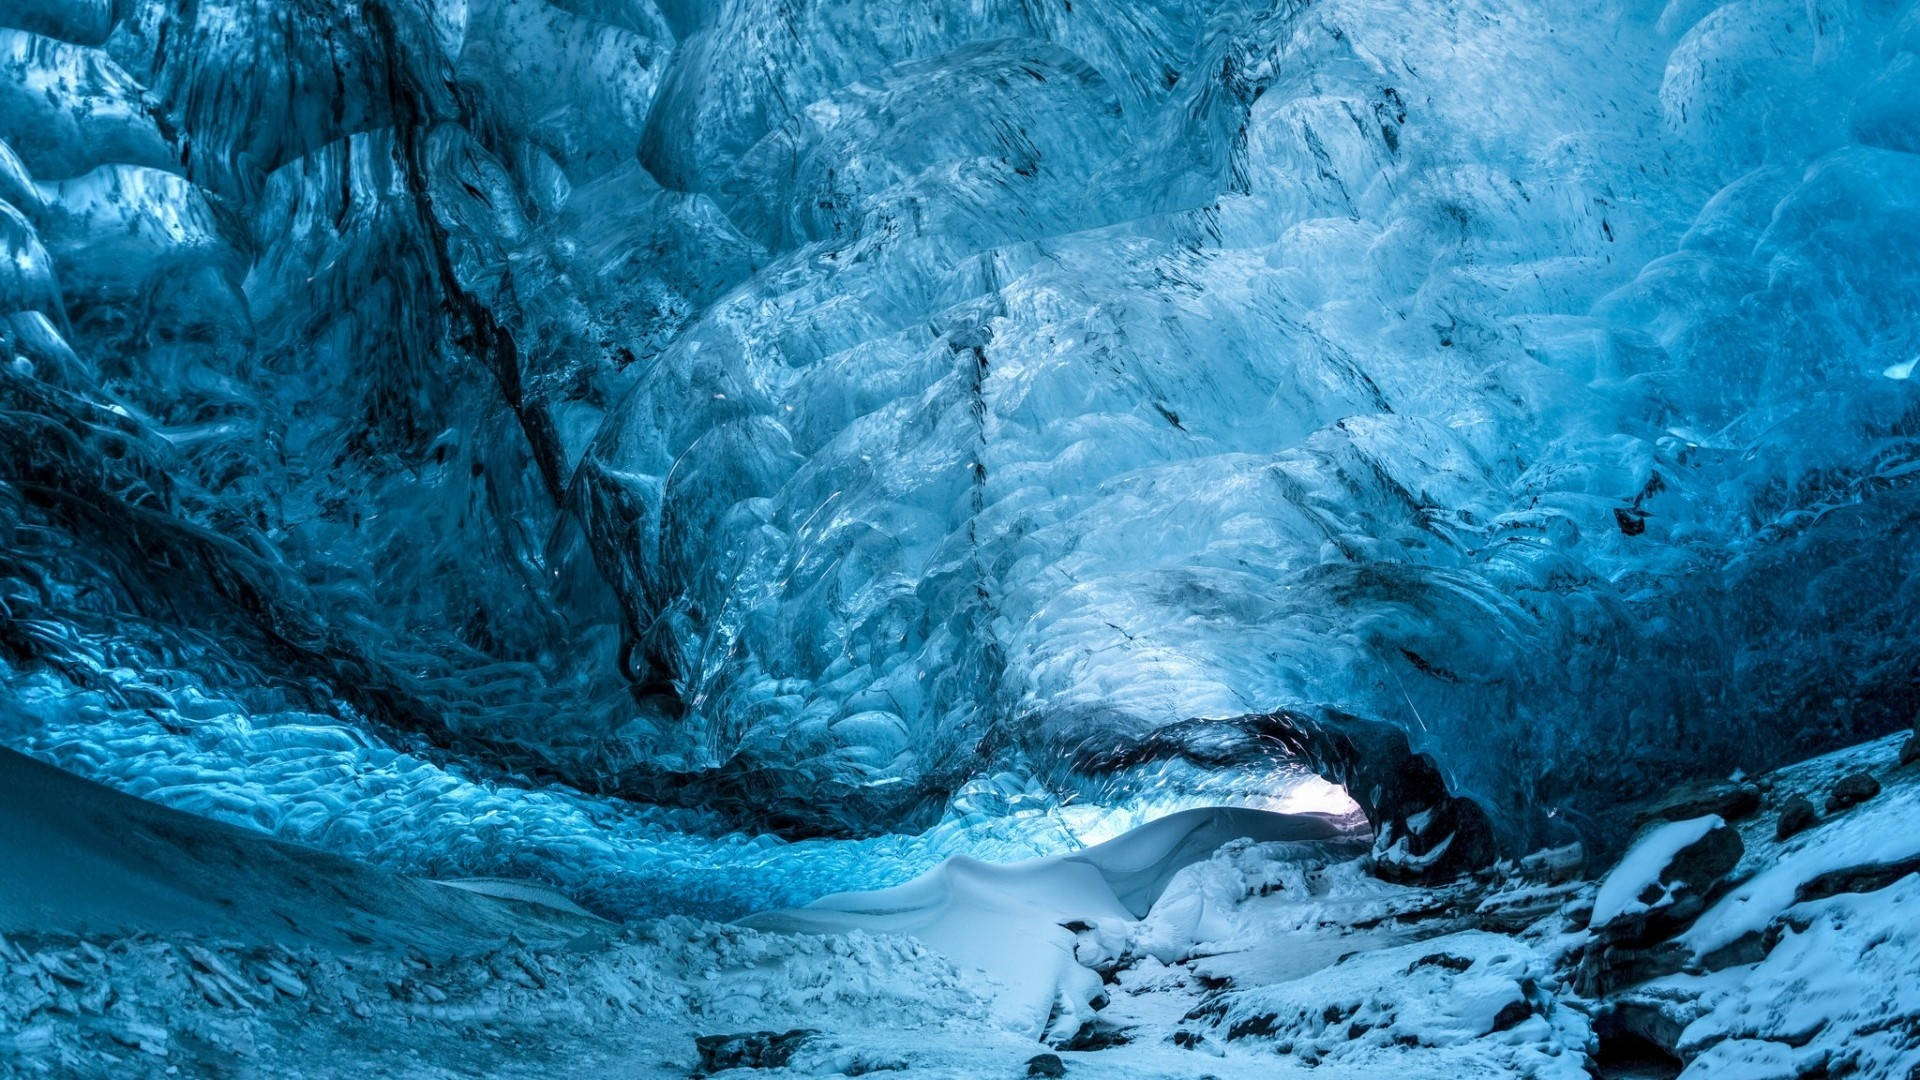 1920x1080 Hd Nature Ice Cave